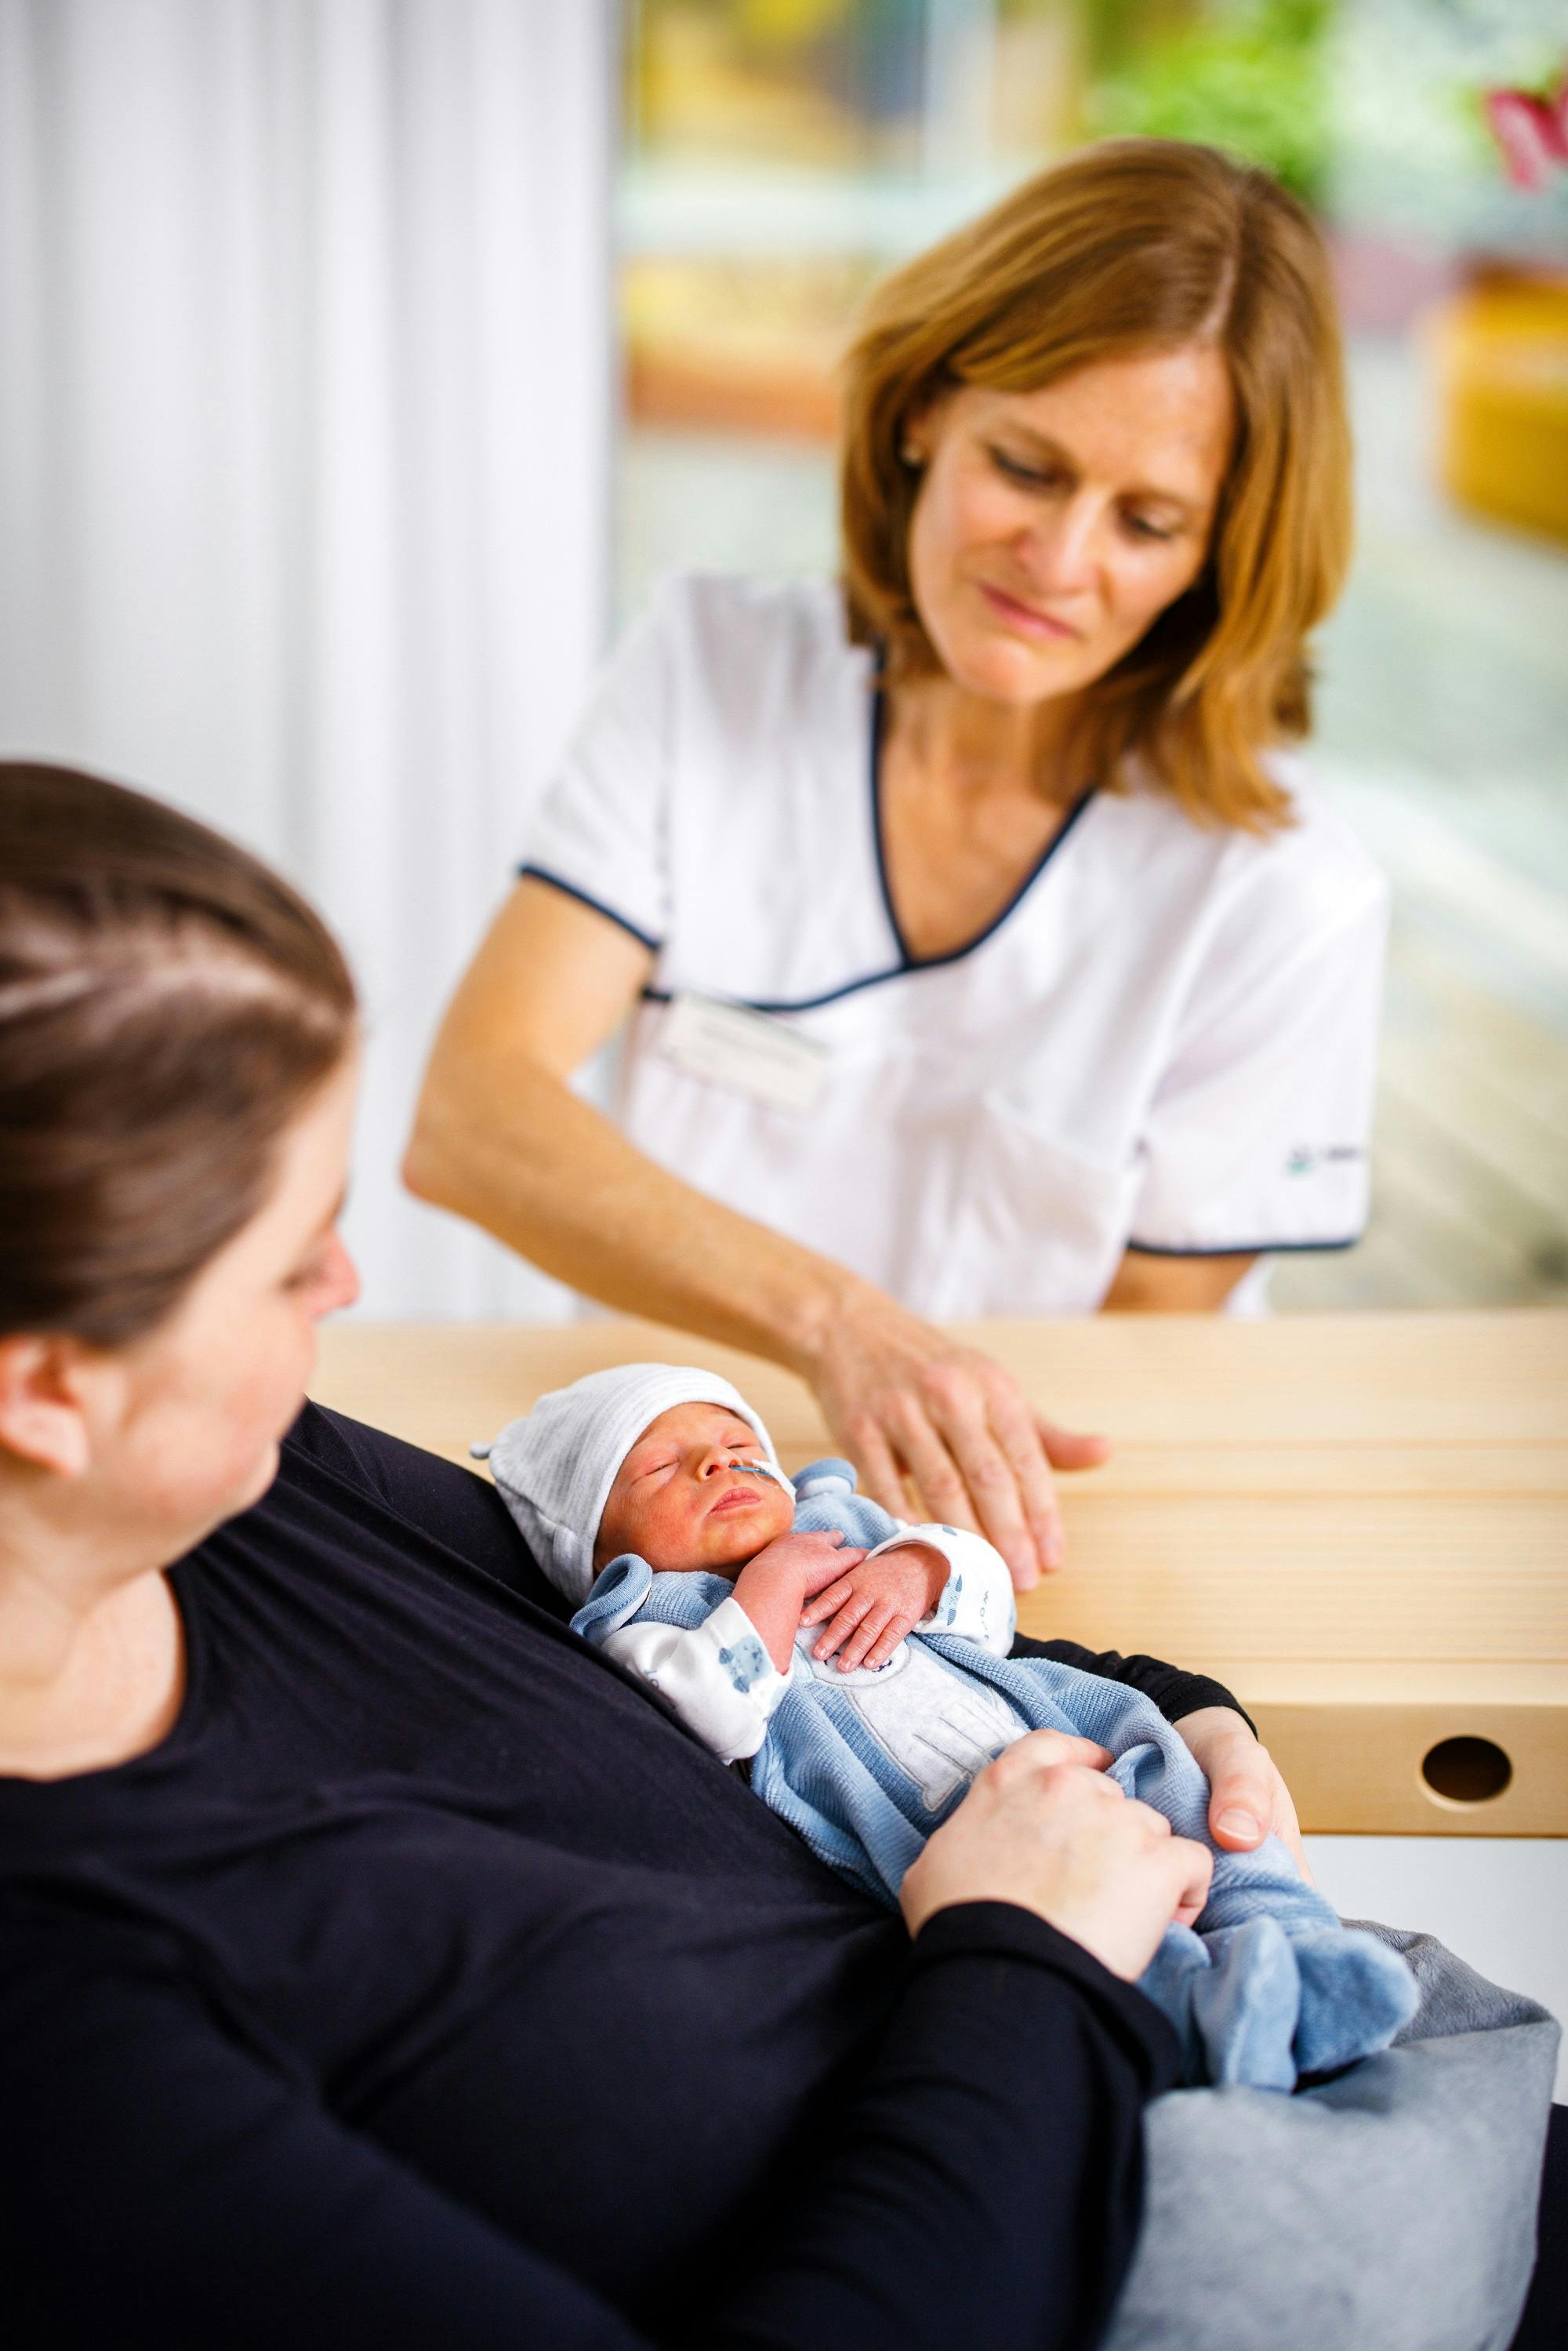 Newborn baby in the arms of a woman with a nurse in the background.